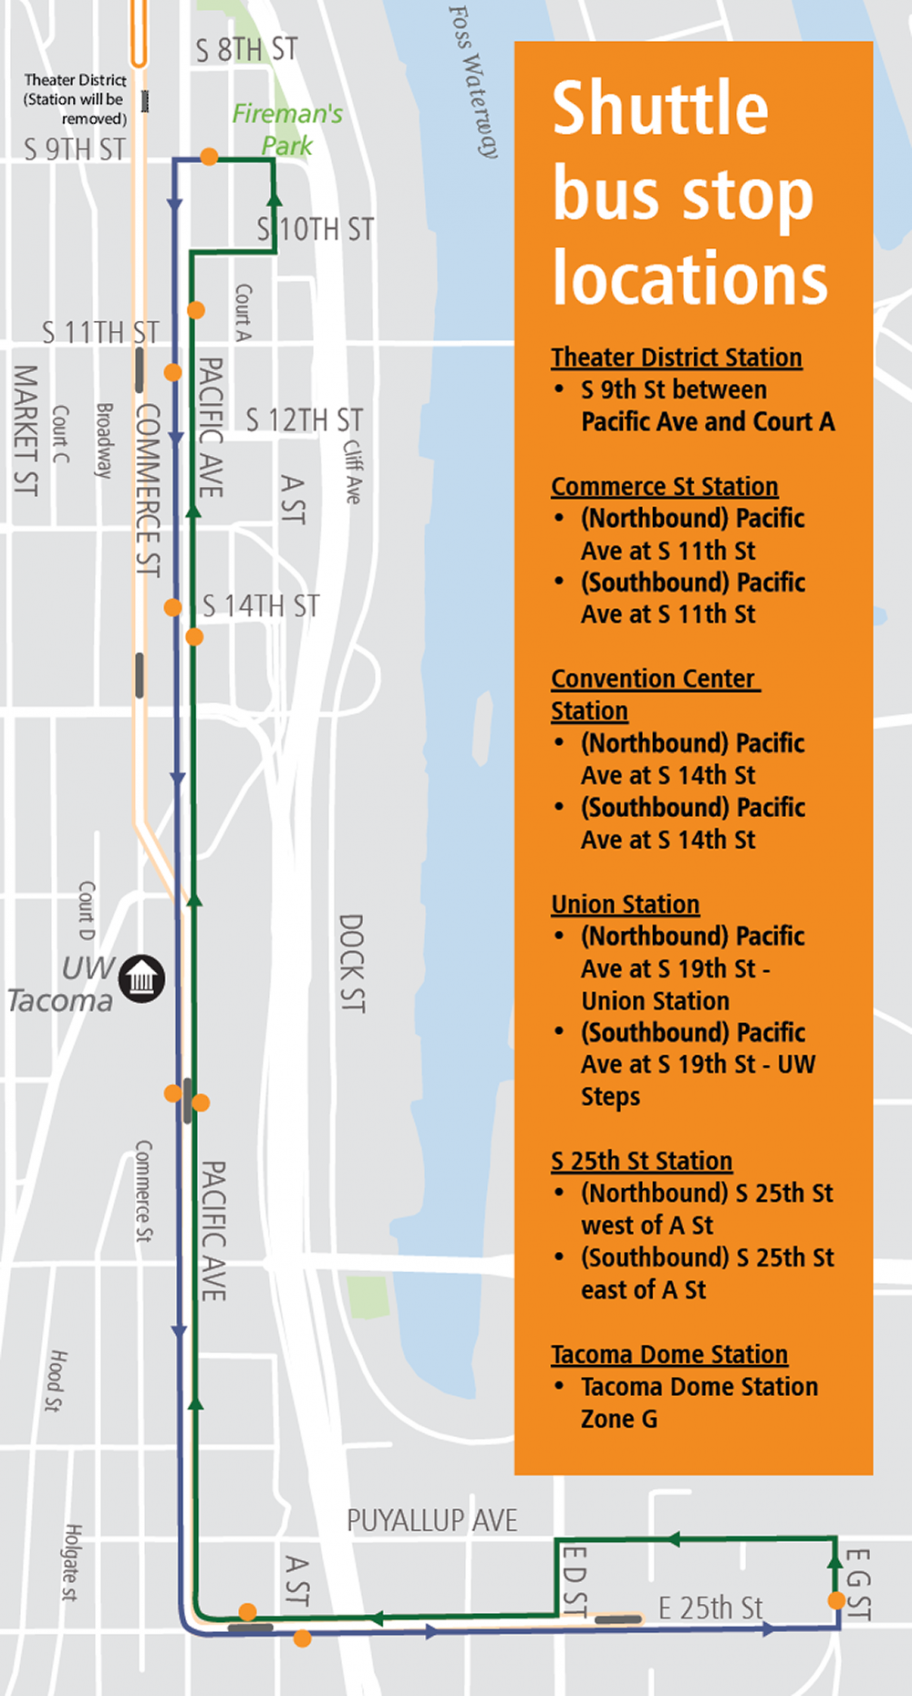 tline-closure-map-and-shuttle-info-20220718.png